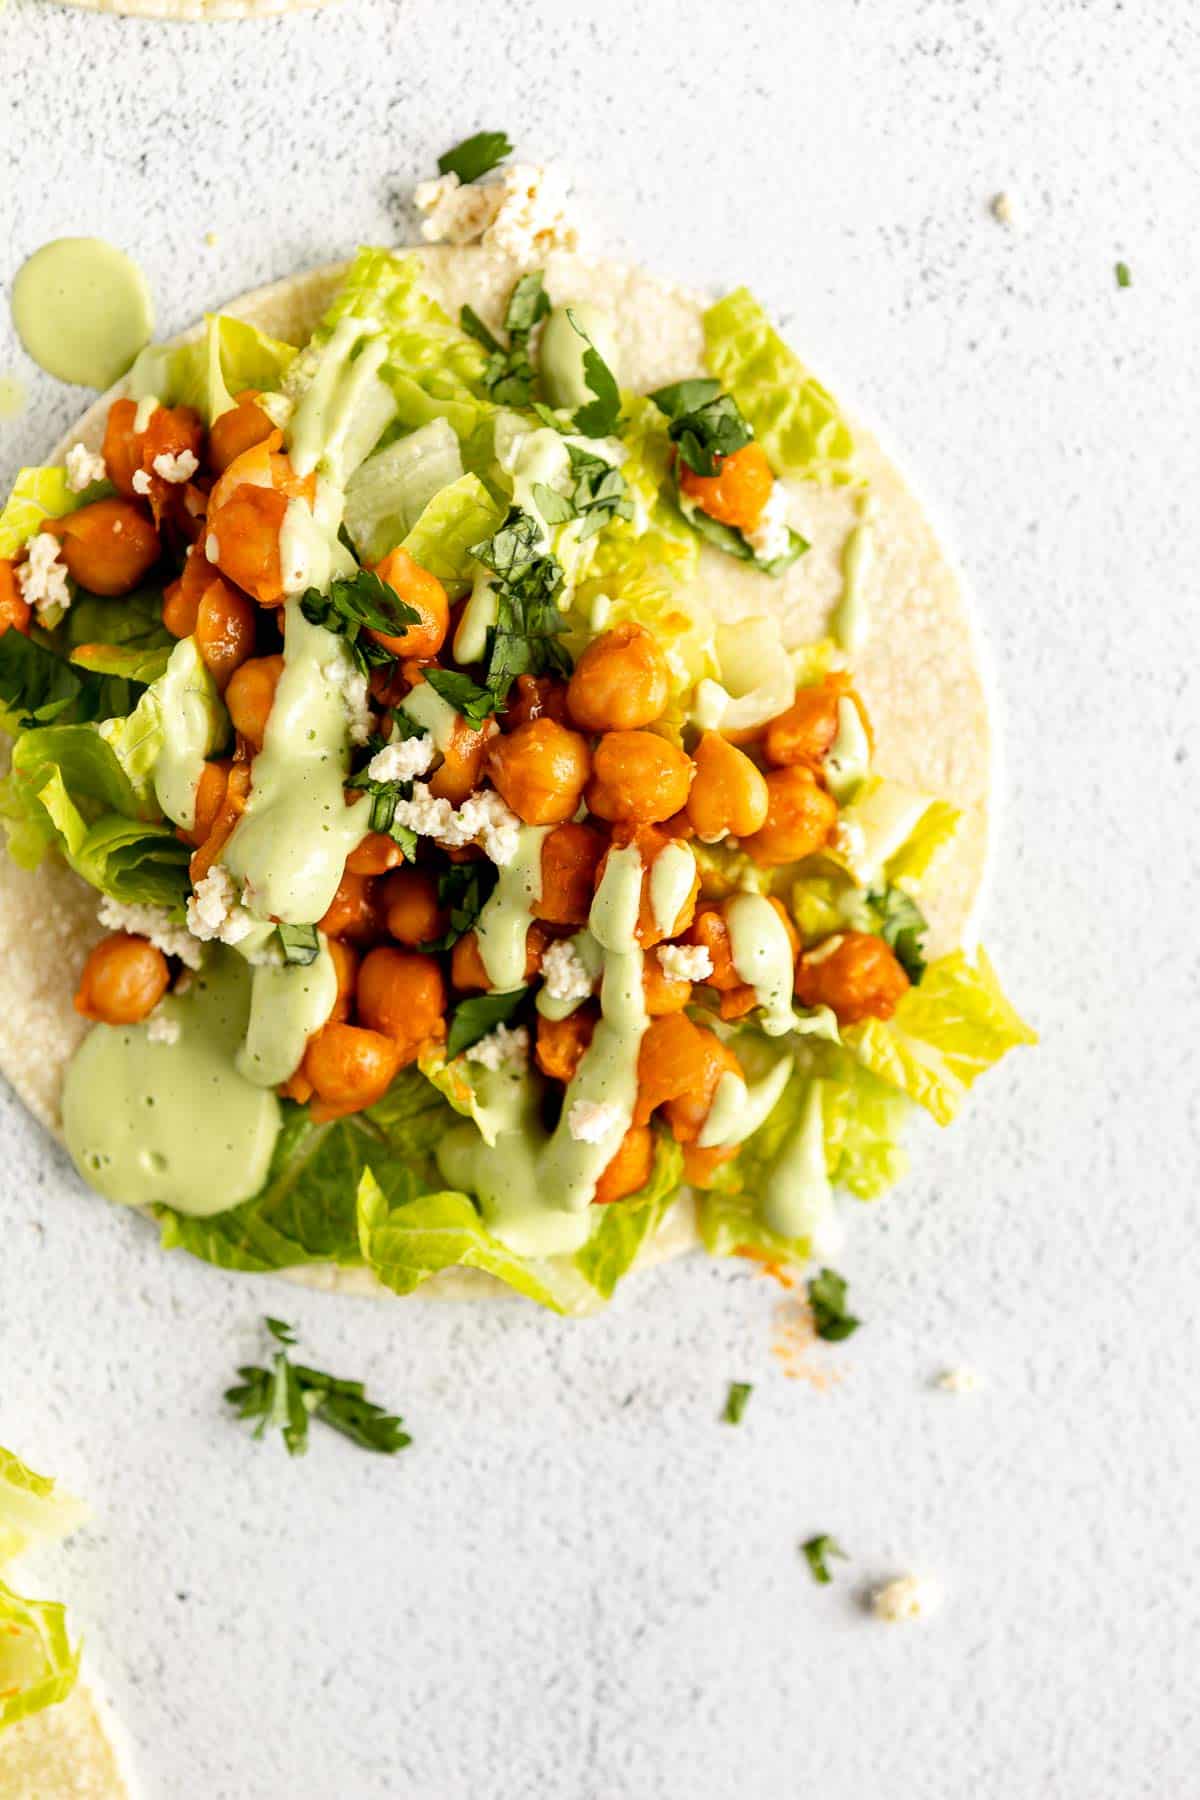 up close image of the vegan chickpea tacos with cilantro